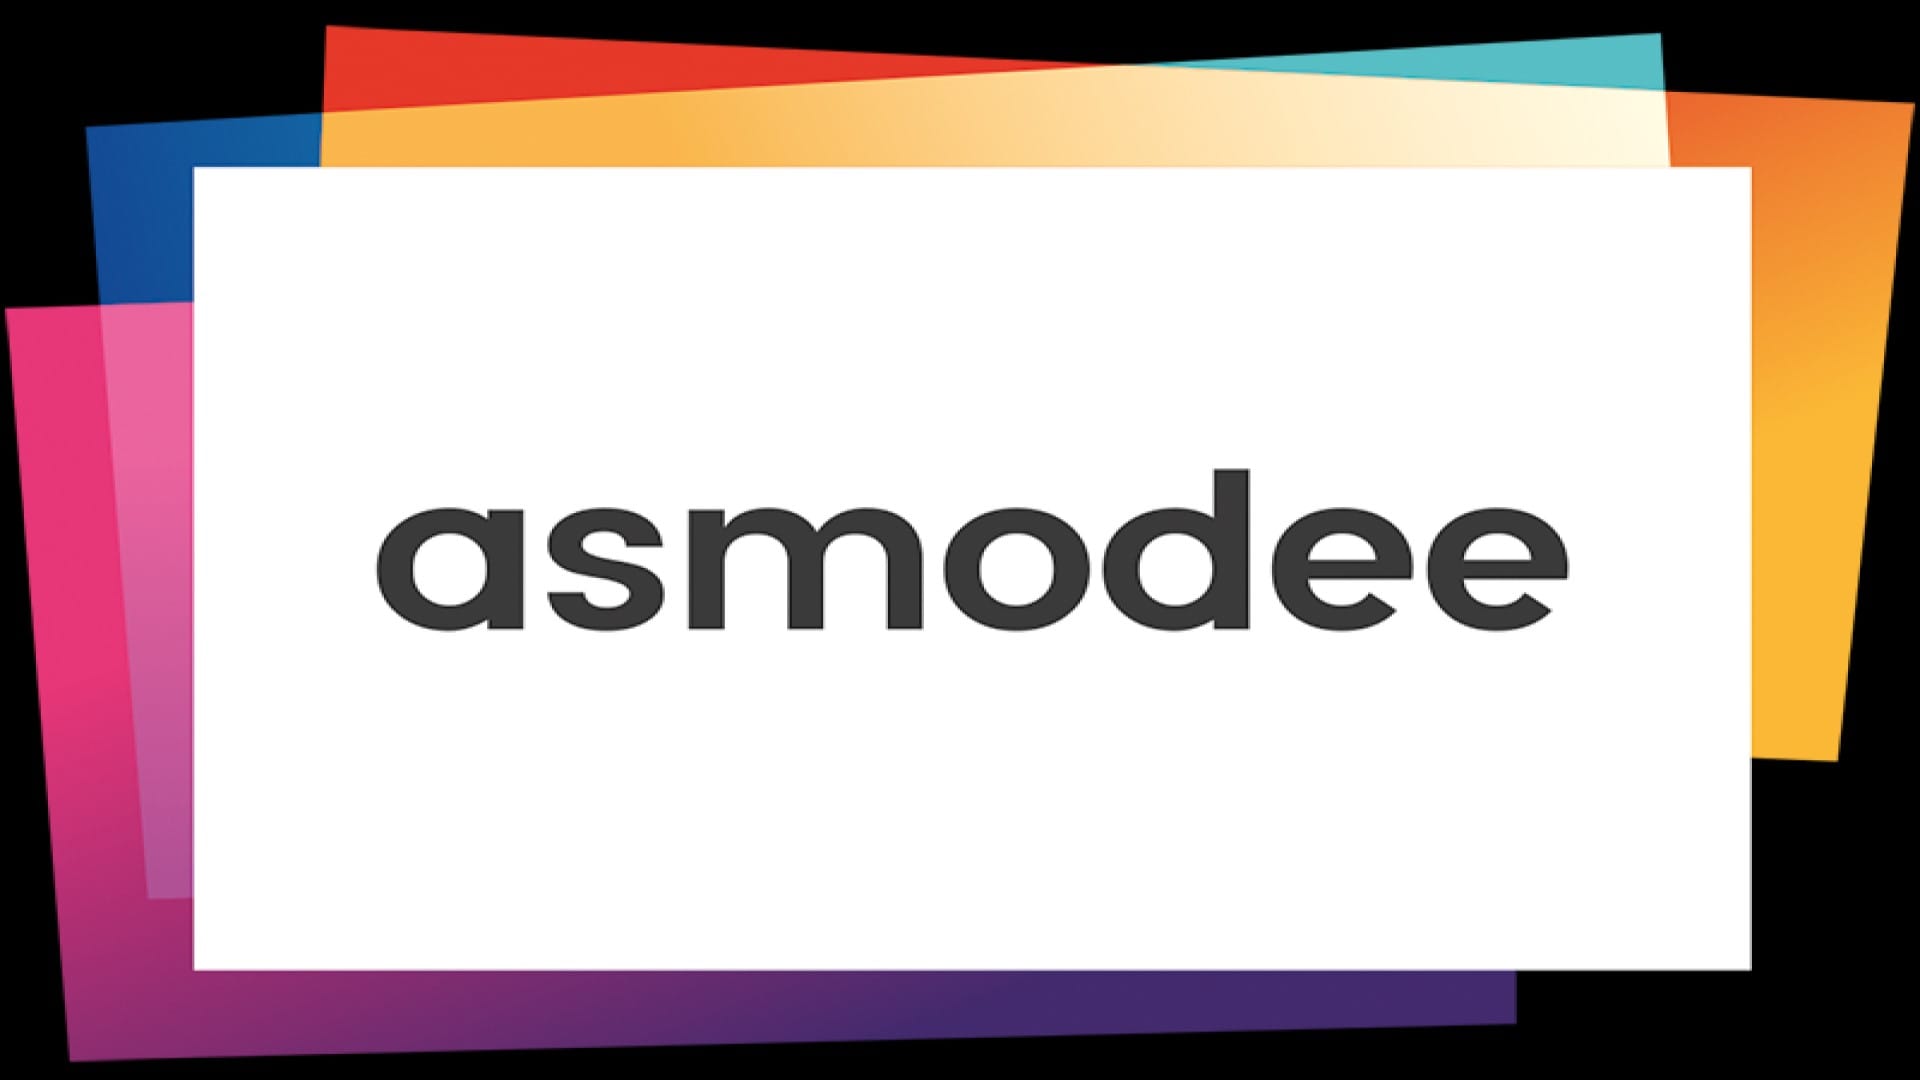 The logo for Asmodee Group on a black background.